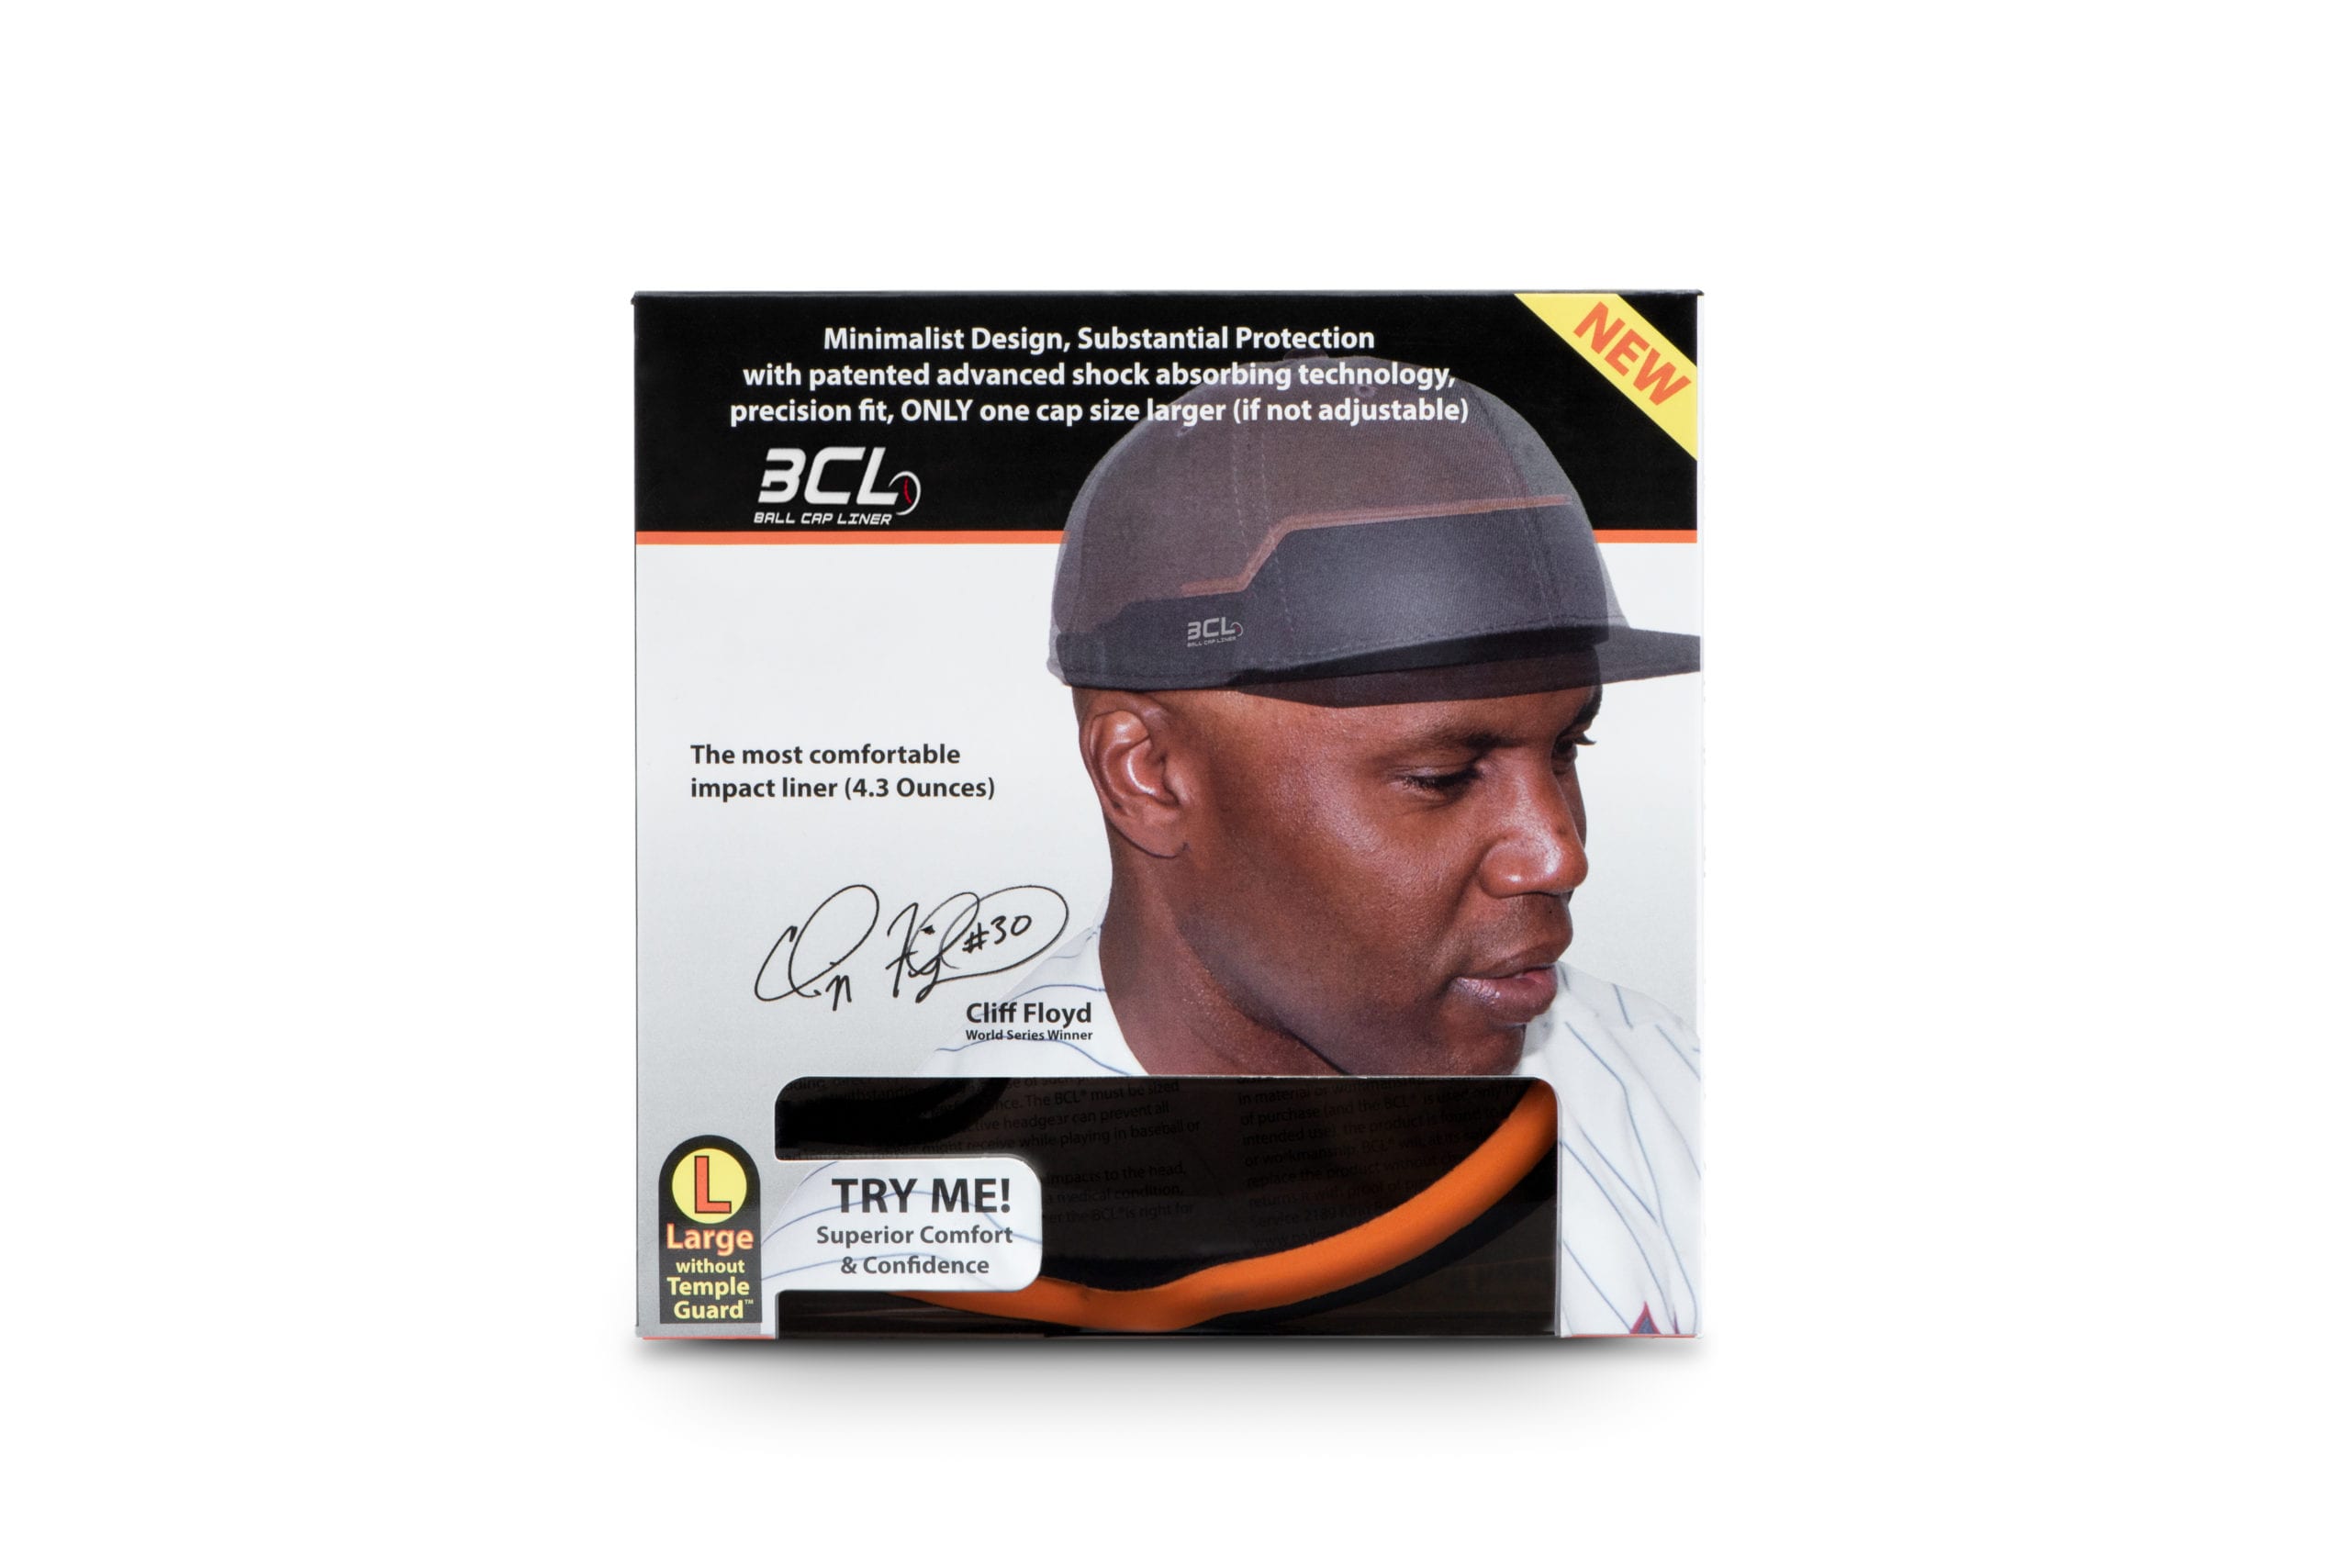 IU C&I Studios Ball Cap Liner packaging with baseball player Cliff Floyd on front